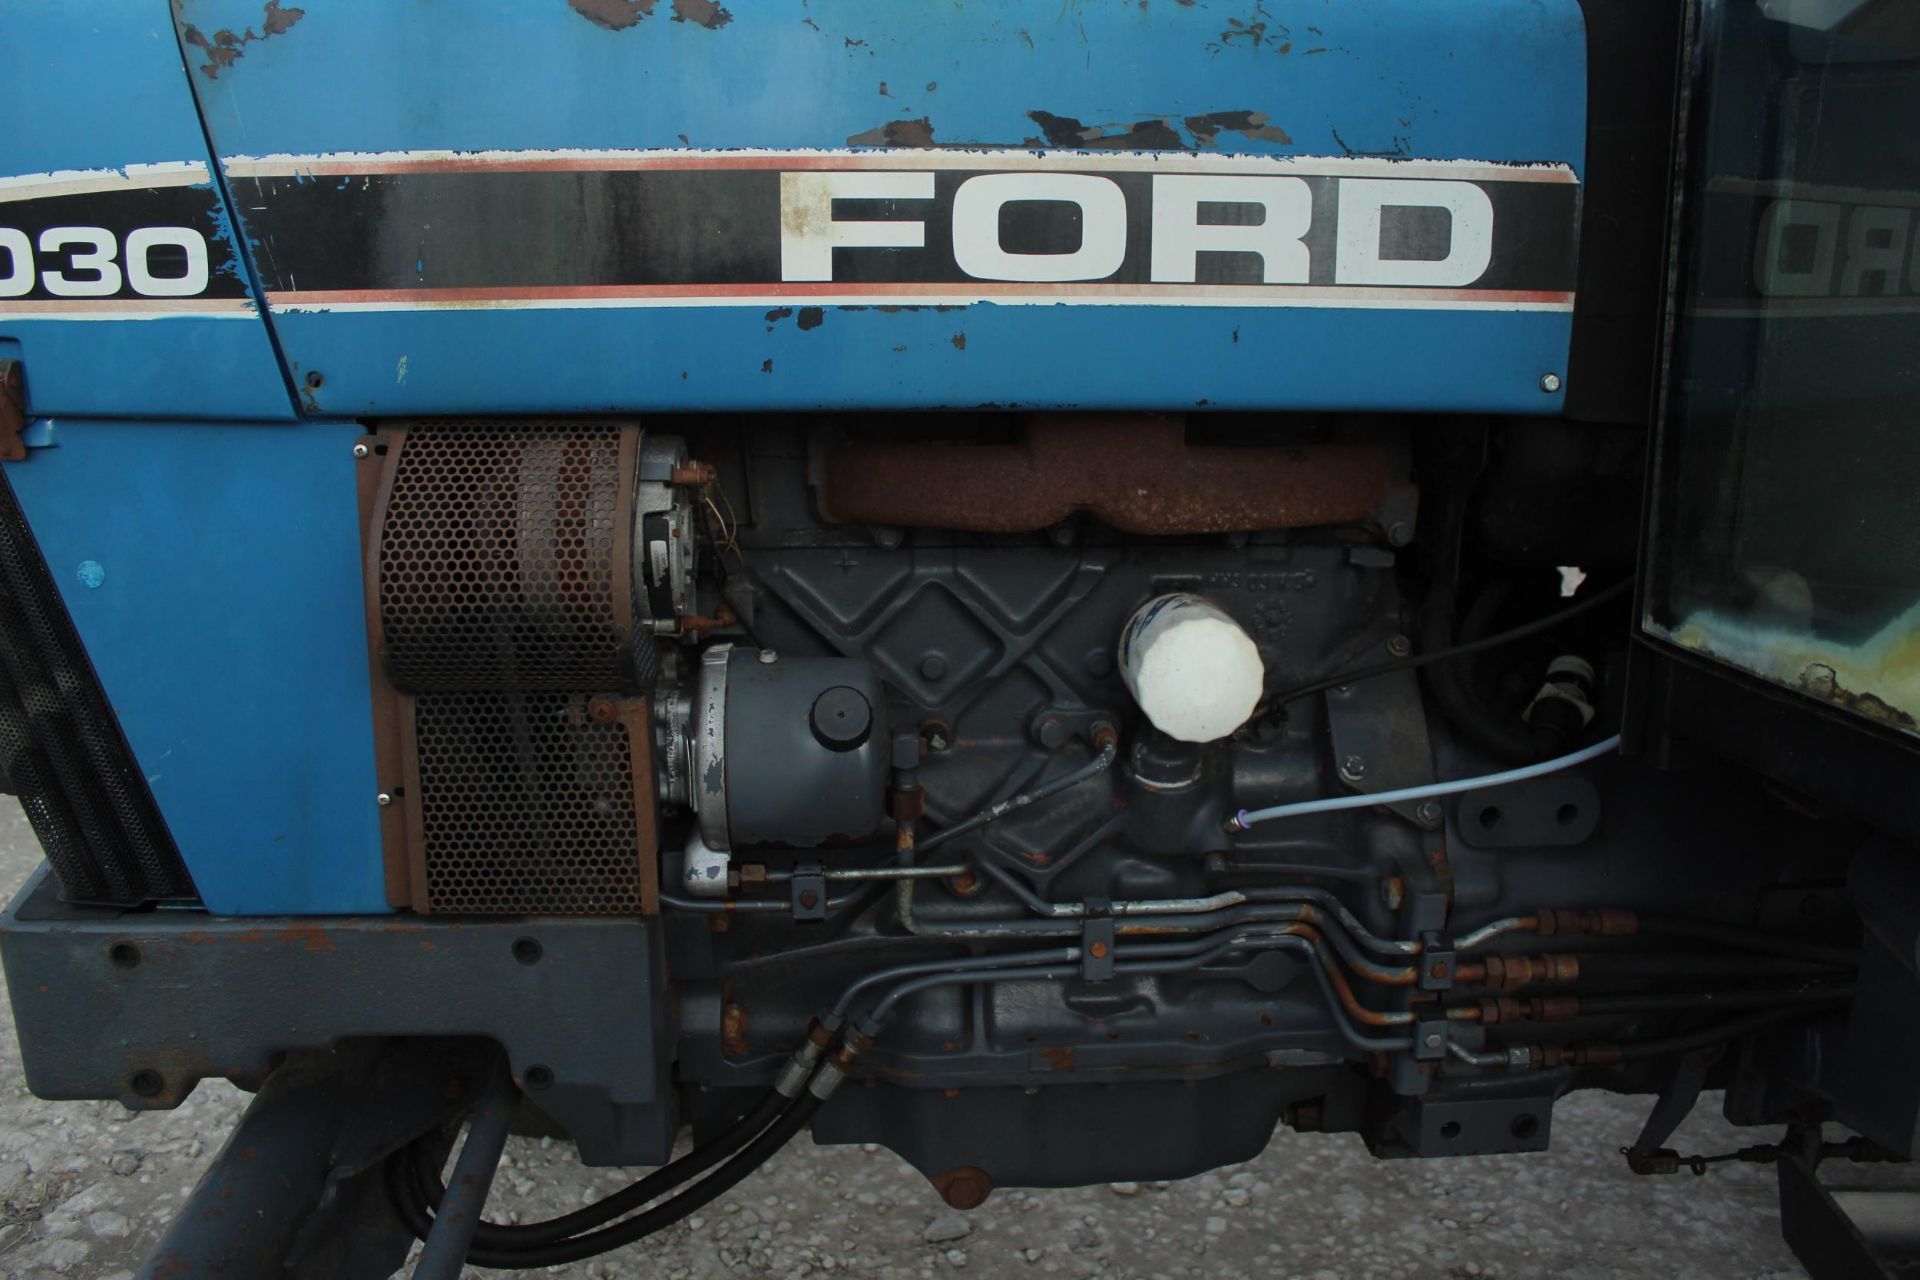 FORD 5030 2 WHEEL DRIVE TRACTOR 9014 HOURS ONE OWNER FROM NEW REG.NO. M85 TRC FIRST REG 01/06/95 - Image 12 of 13